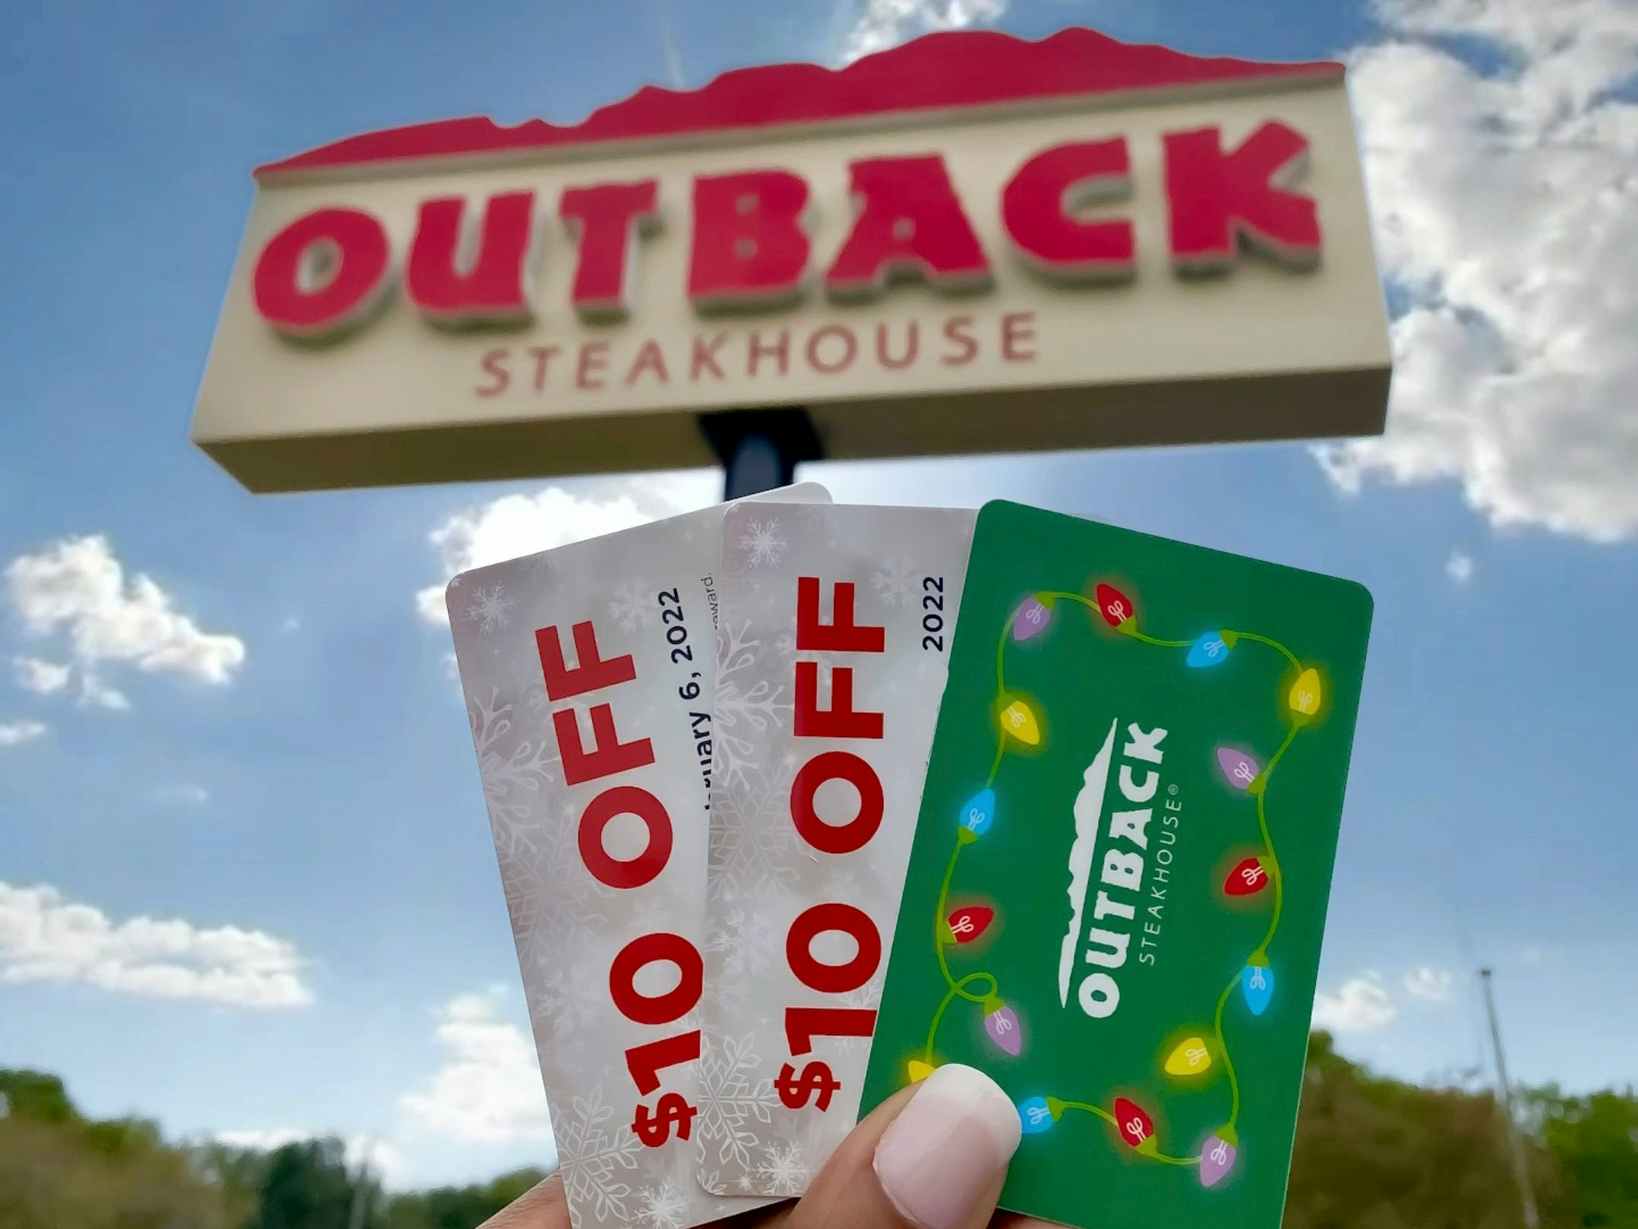 An Outback Steakhouse gift card and two bonus $10 OFF cards being held in front of an Outback Steakhouse sign.